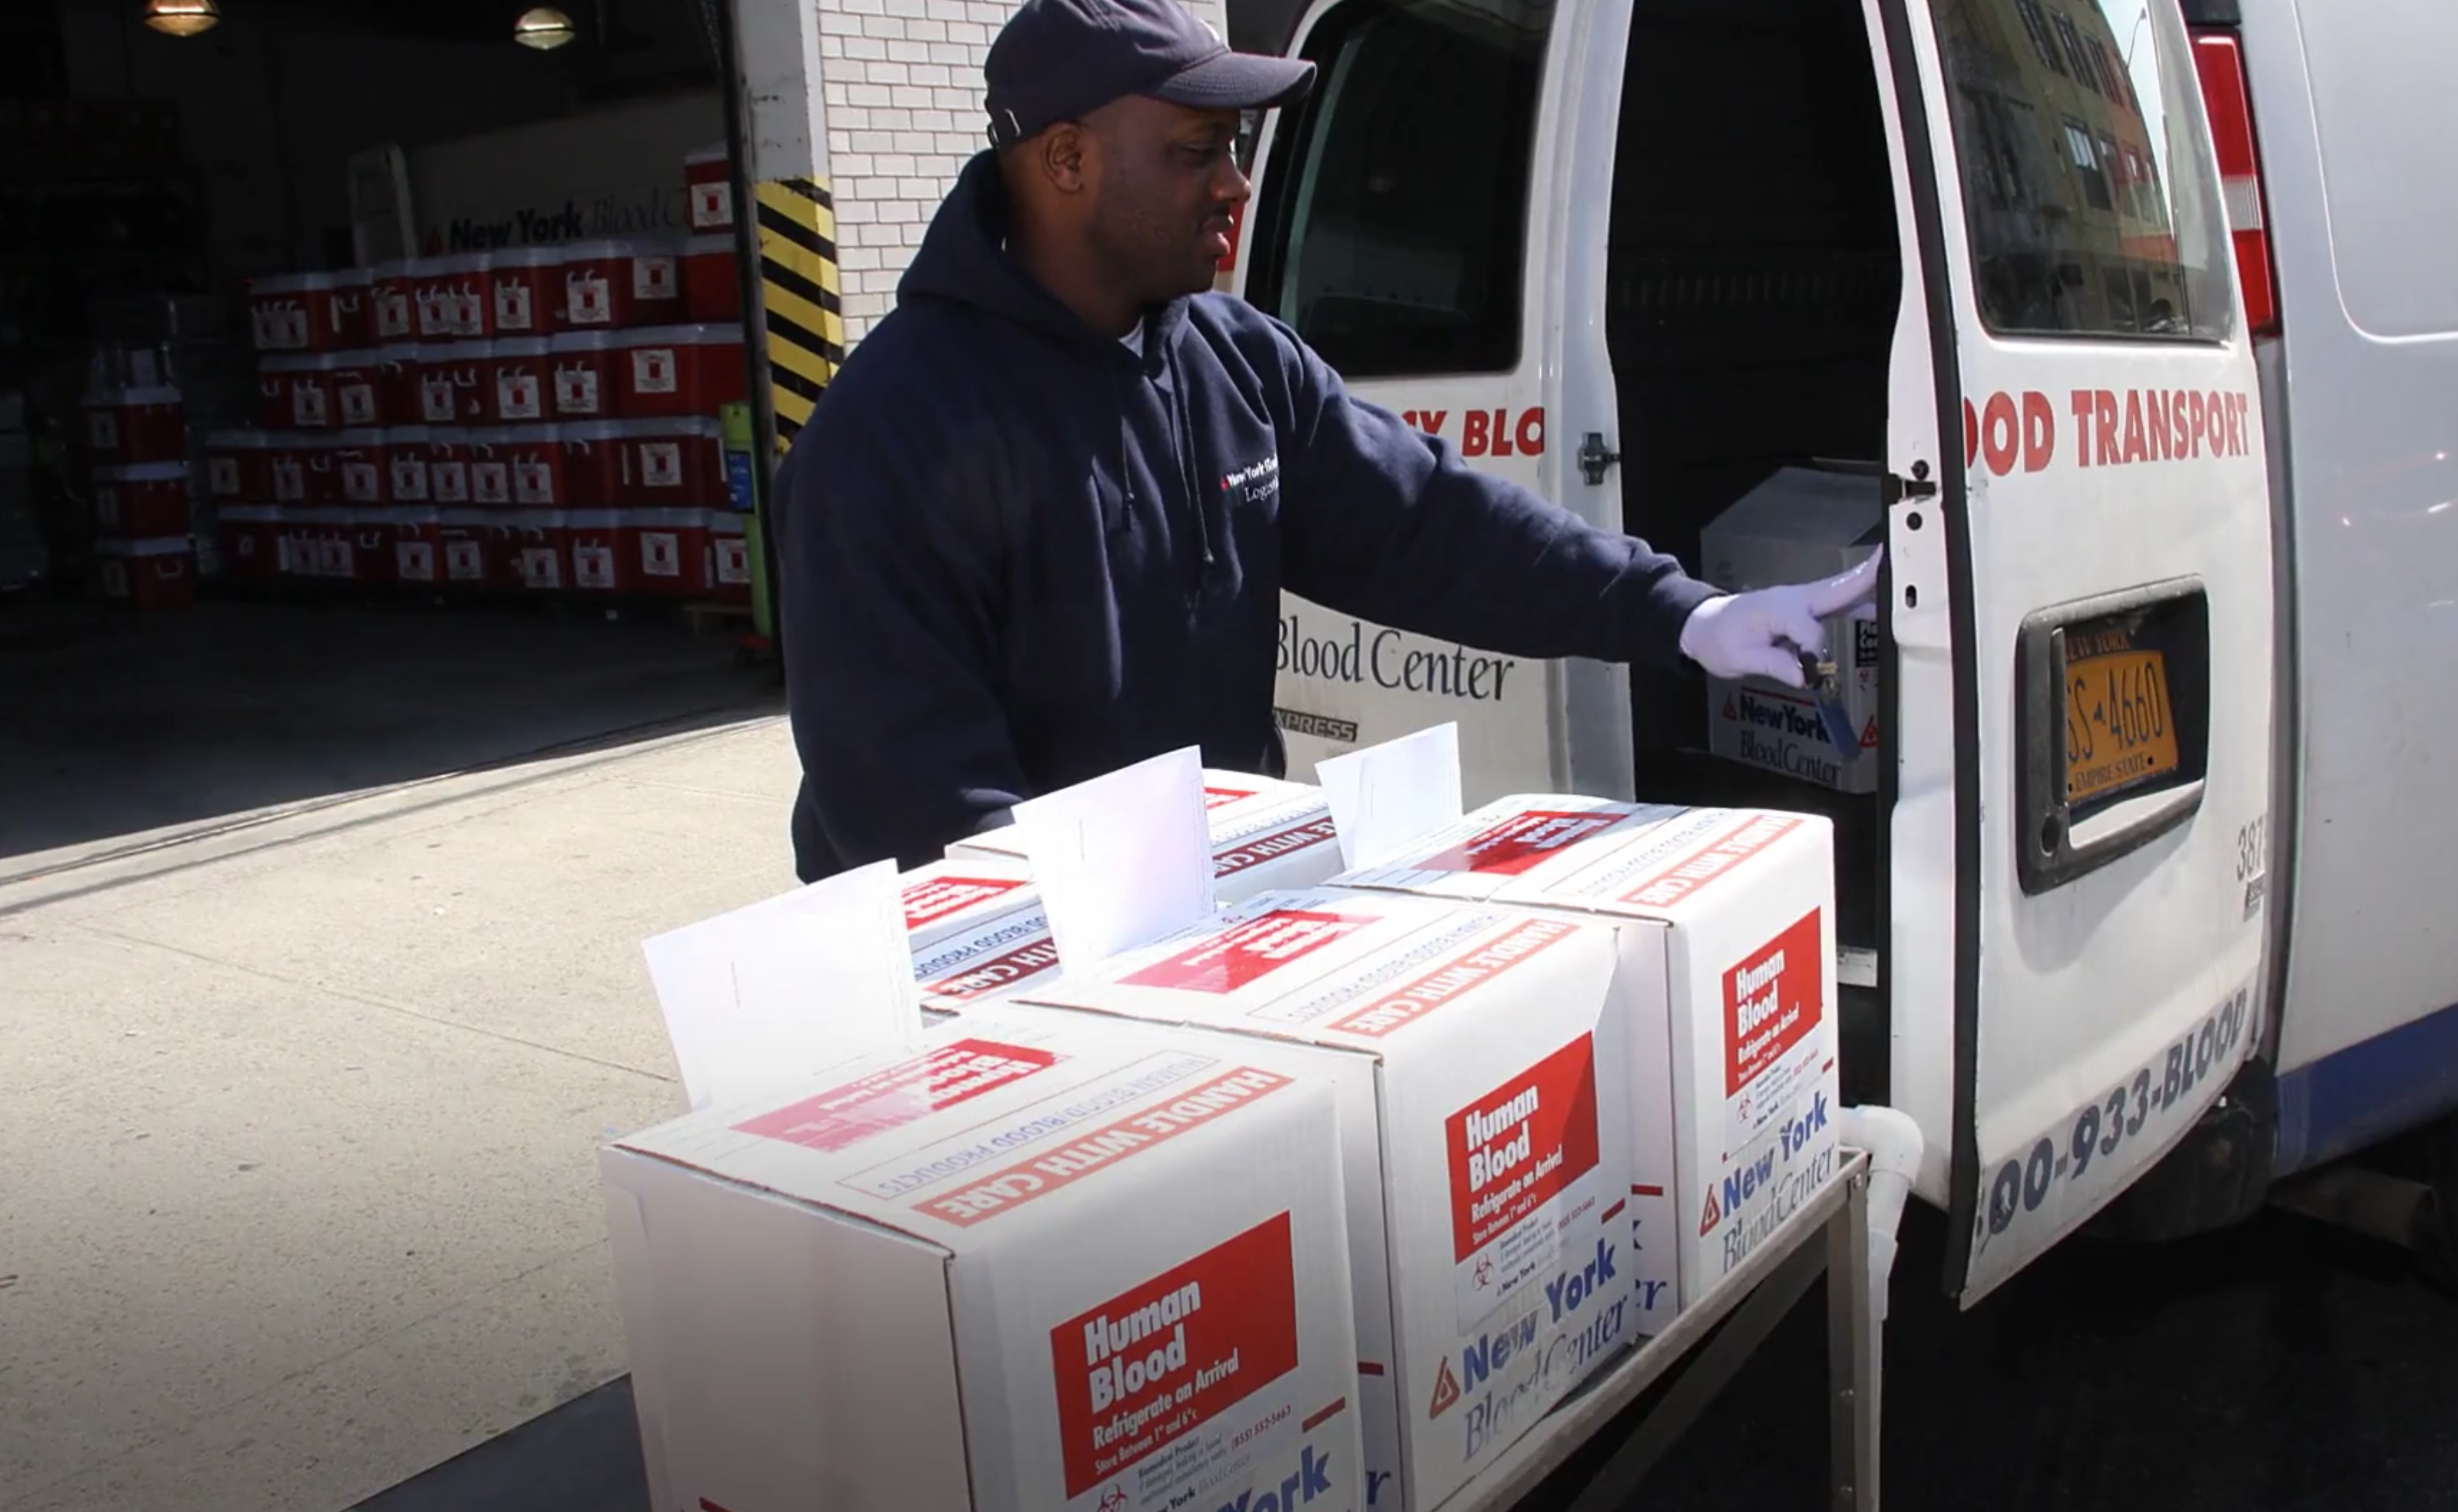 New York Blood Center staff member loading van with blood products for delivery to hospitals and patients in need.